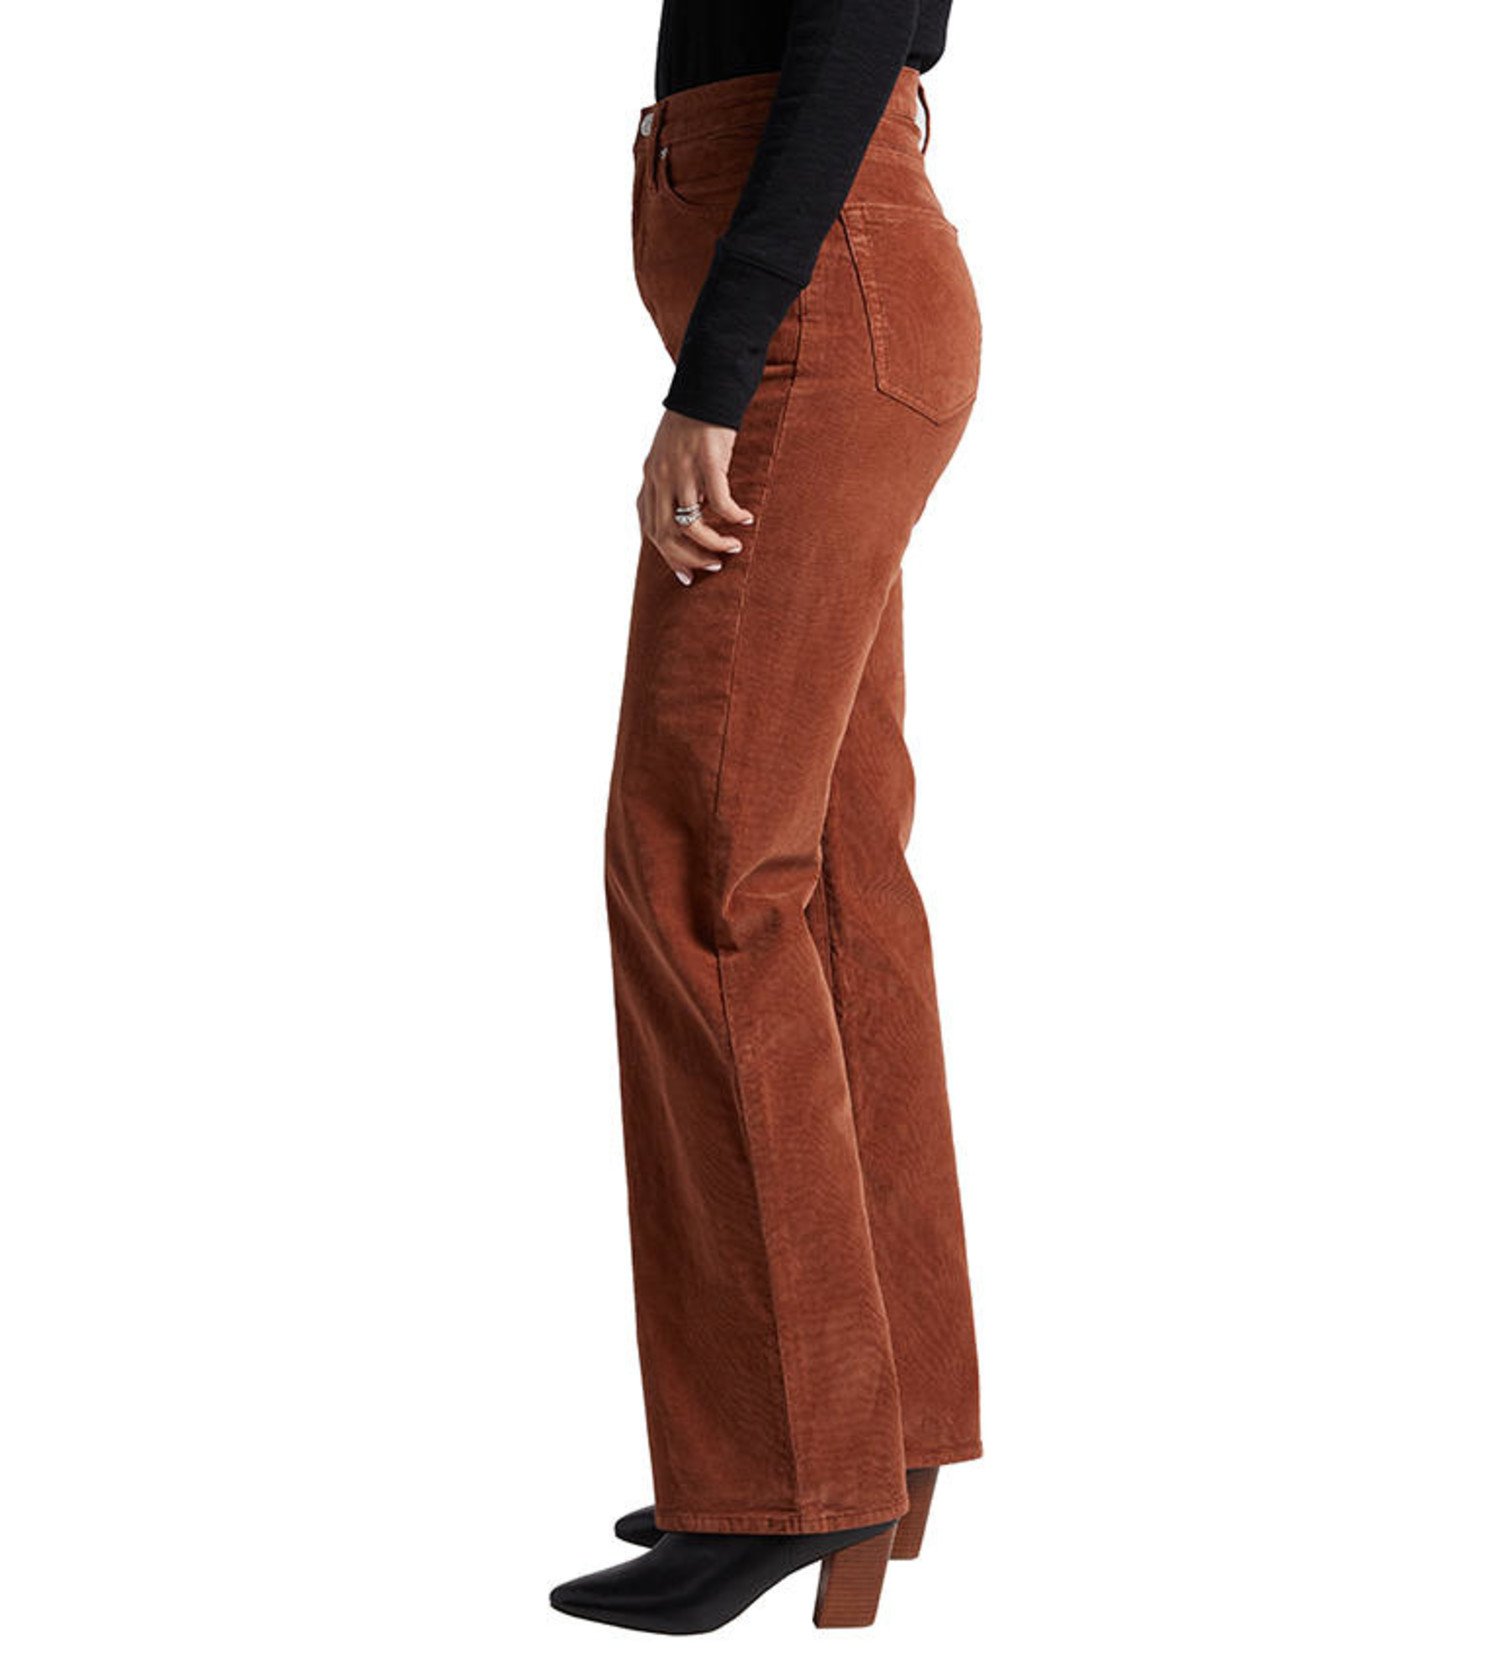 Silver Jeans Co. - Highly Desirable High Rise Corduroy Trousers